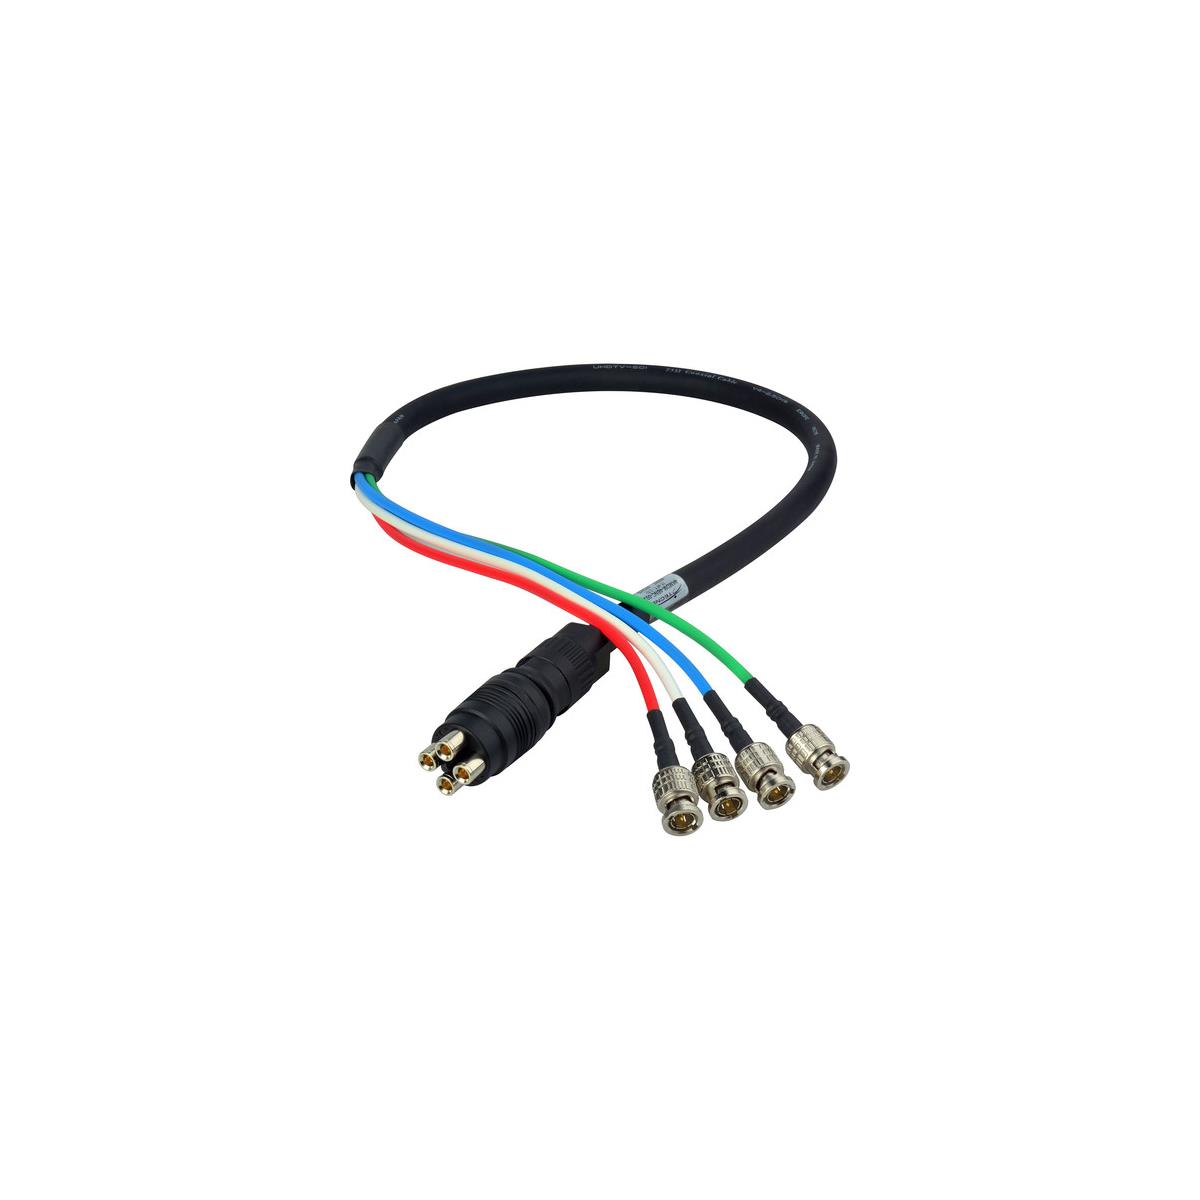 Laird 15' 4K UHD 3G HD-SDI 4-Channel DIN Male to BNC Camera Breakout Cable <b> 4-3G HD-SDI Signal Channel Quick Connect System for 4K/UHD Video Formats </b>One step, quick-connect Laird coax Canare cable assemblies connect 4 channels of 3G HD-SDI signals for 4K/UHD video formats. The Laird cables are assembled with Canare 4 channel, V4-2.5CHW flexible coaxial cable, allowing a break out to 4 Canare BNC or 4 DIN connectors. The Canare male connector, MDM-V4C25HW is designed to mate with the MDF-V4JRU panel mount receptacle which features a 4 DIN pass-through on the back side to increase your connectivity but not your rack space. Laird 4K UHD Canare camera cables assemblies make quick work of keeping everything in line and organized. Available in a variety of lengths. Use with the Canare MDF-V4JRU 4K DIN 1.0/2.3 4-channel chassis mount connector.• Quick connect and disconnect• Multiple 3G-SDI signals to 4K/UHD formats• Canare cable with solid and lightweight nylon resin body• Push-pull locking Canare coax connectors with protective rubber boots• High performance Canare BCP-B25HW BNC or 4 DCP-C25HD DIN connectors• Made in the USA in a Canare trained fiber shop• Canare V4-2.5CHW 4-Channel 4K 75Ohms Coaxial Cable• 4 DIN 1.0/2.3 connectors• MDF-V4JRU accepts MDM-V4C25HW and also DIN 1.0/2.3 plugs<b> Applications </b>• High density 3G-SDI• applications• Mobile trucks• Fly packs• Studios• 4K transmission• Consolidate HD-SDI lines